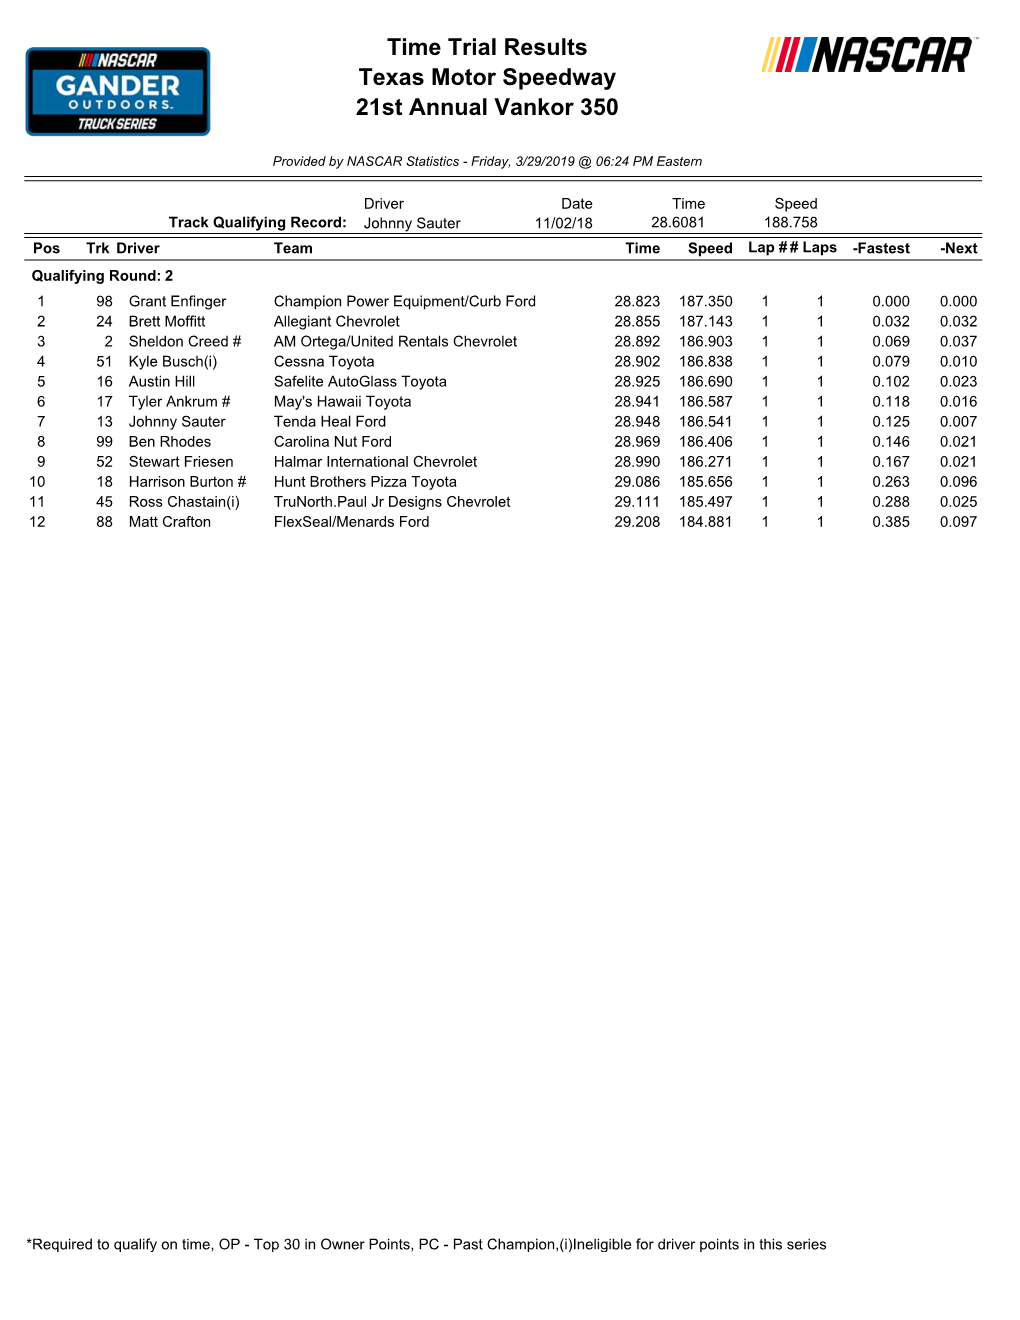 Time Trial Results Texas Motor Speedway 21St Annual Vankor 350